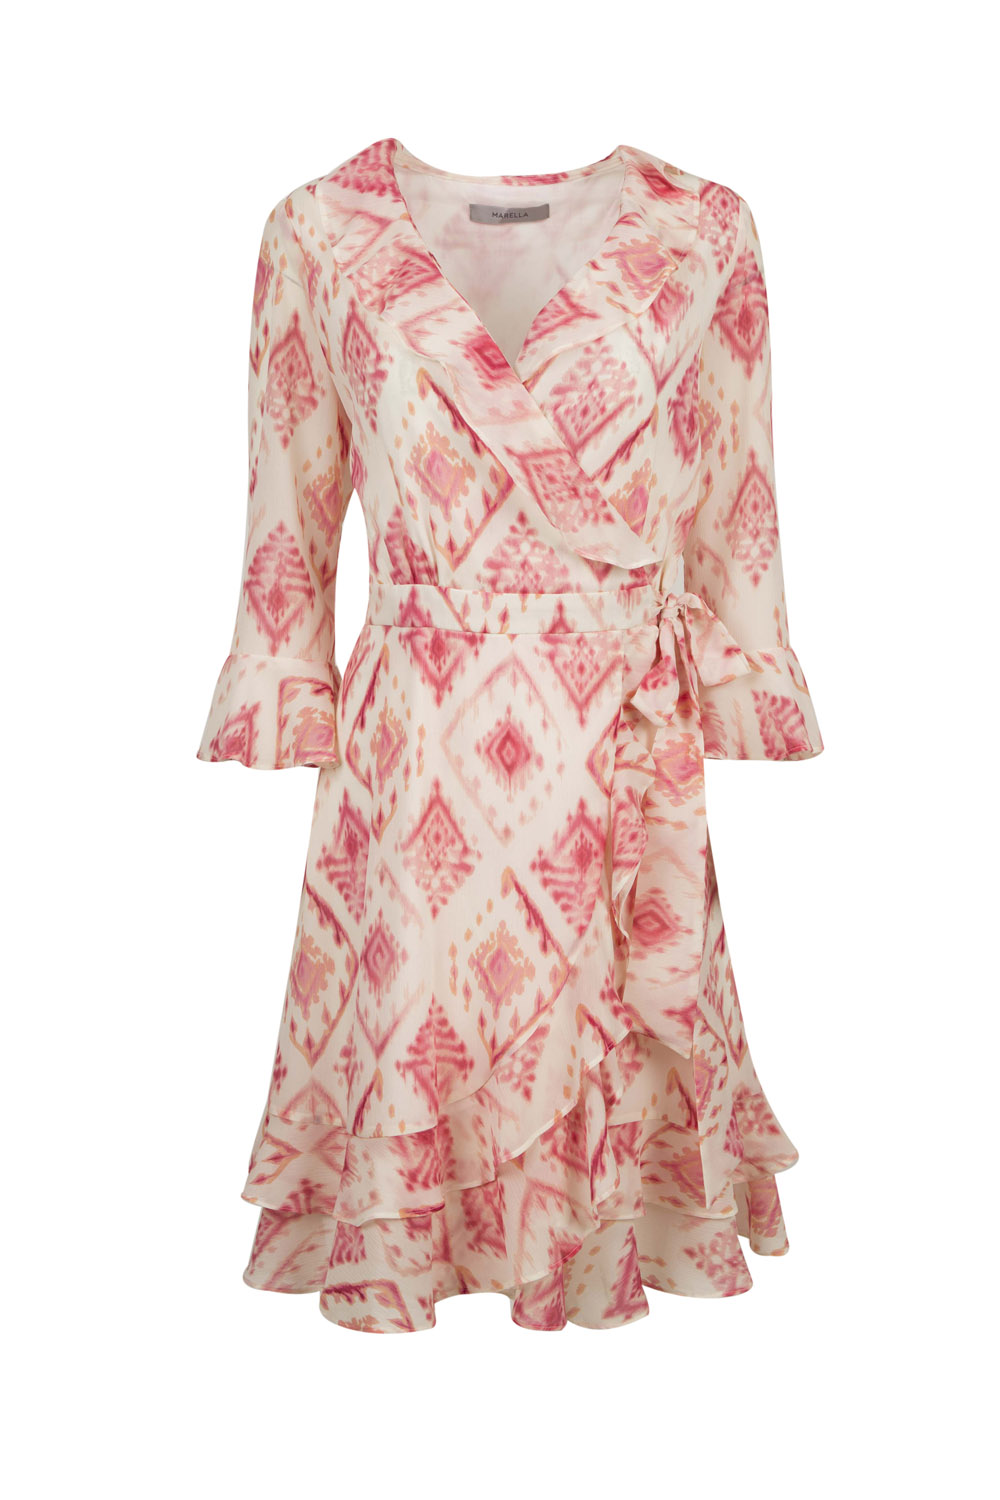 Ikat Patterned Sheer Wrap Dress with Frills (and Incorporated Cotton Lining)